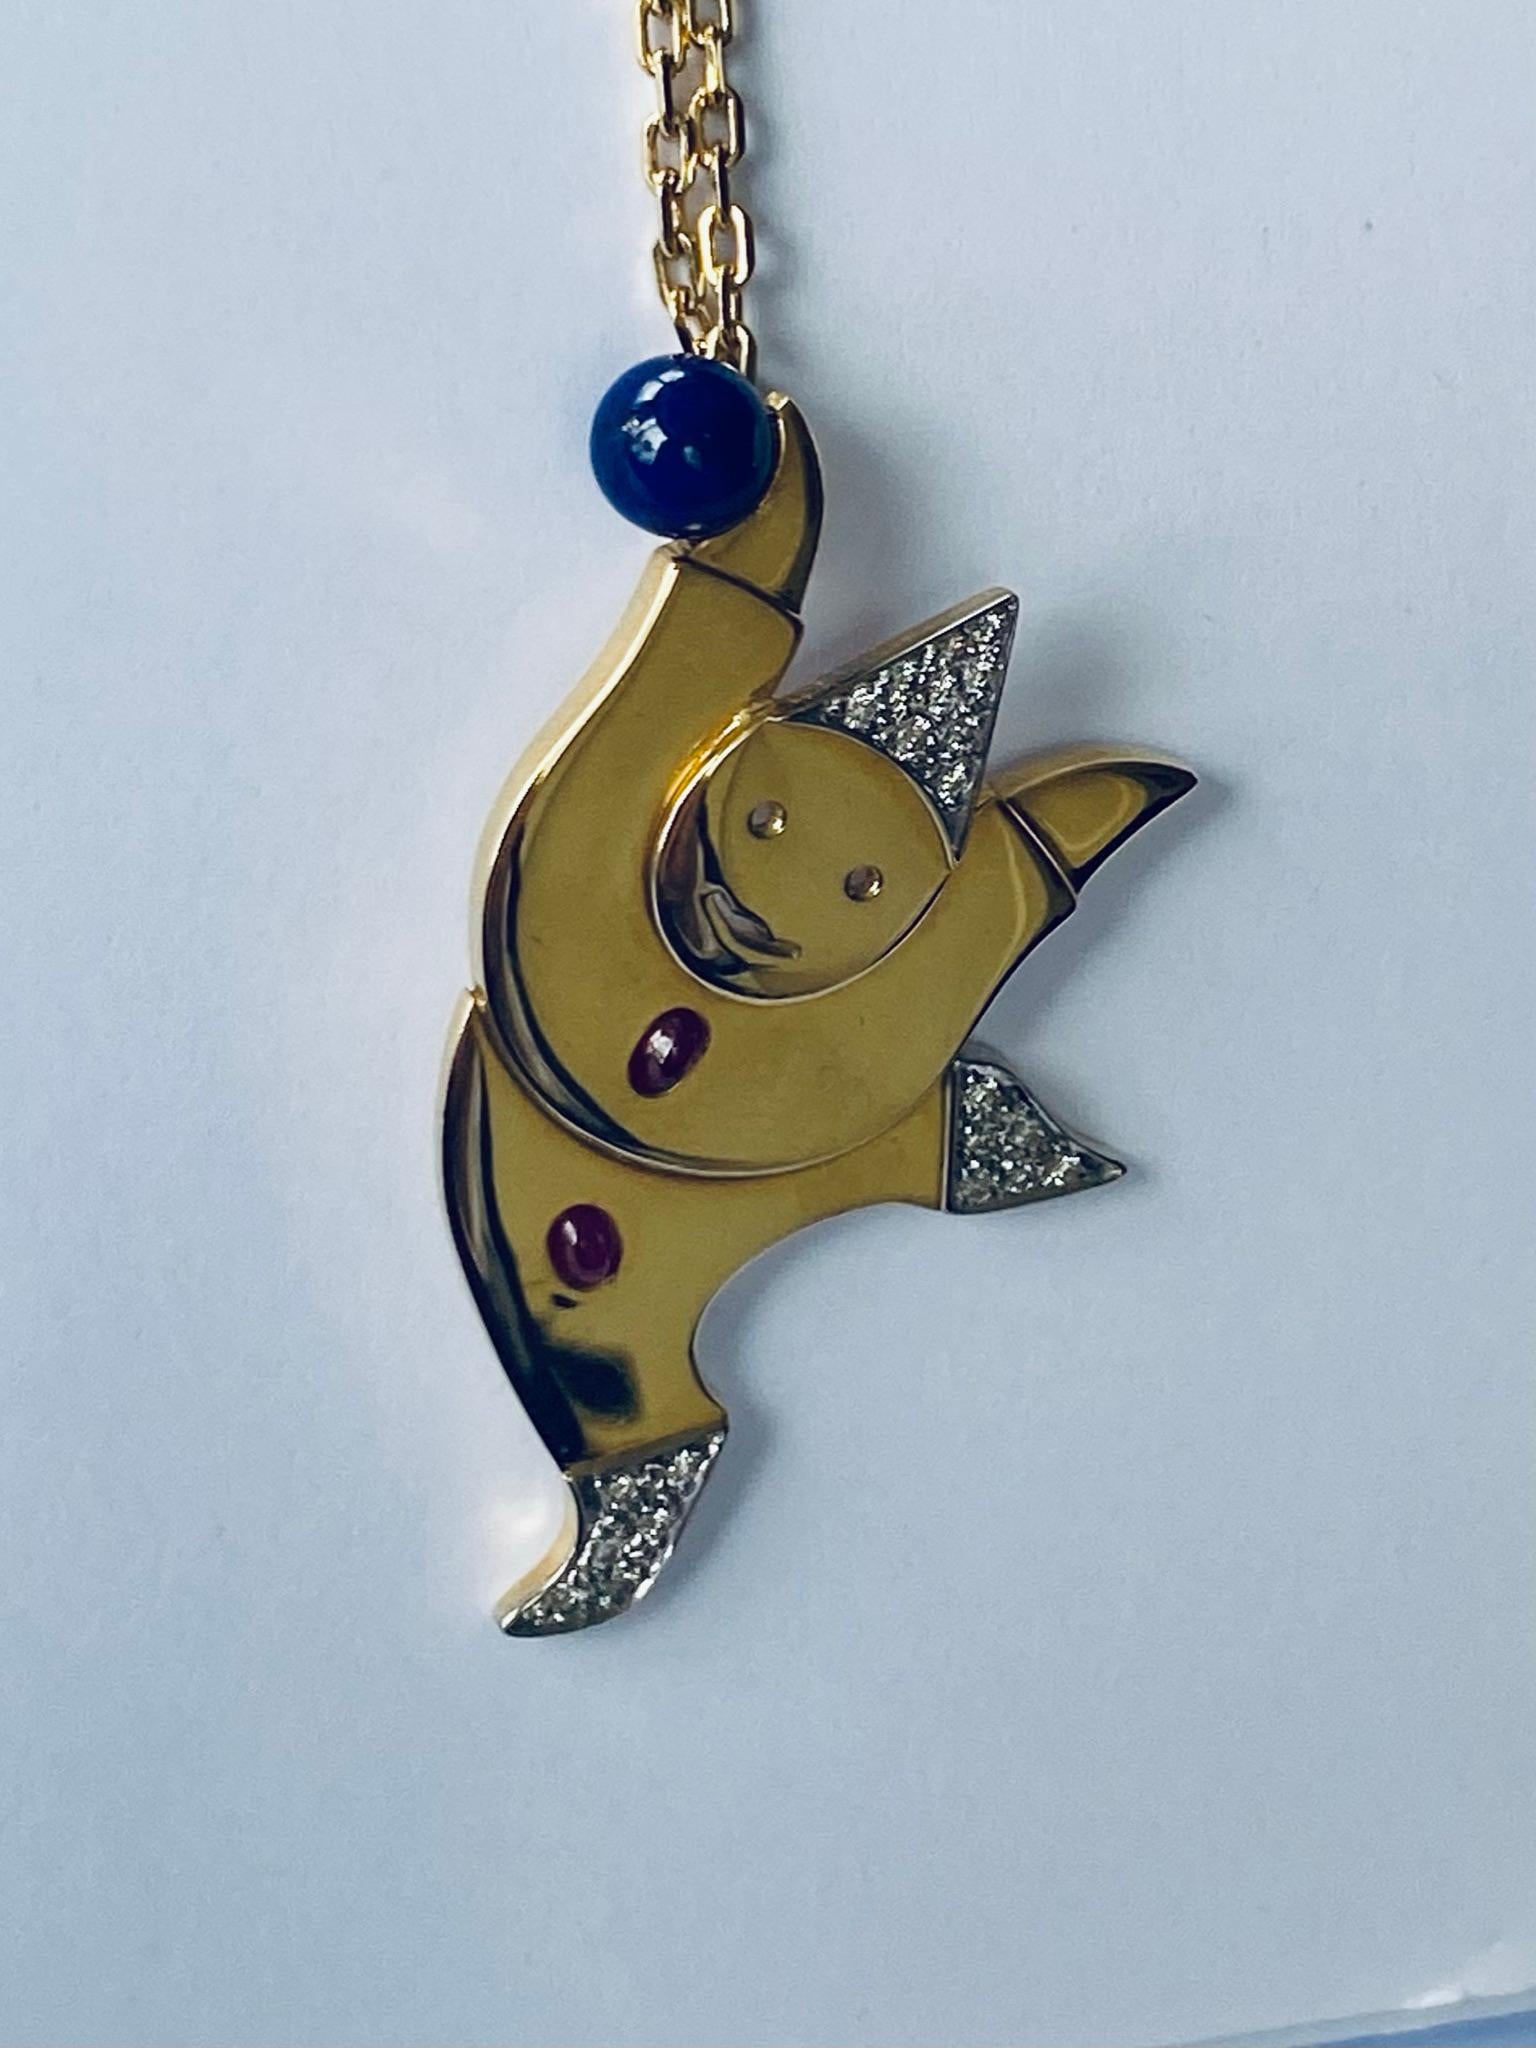 One (1) 18K. Yellow and White Gold Pendant with Chain, stamped 750
set with:
21 round brillant cut natural diamonds, 2 oval cabuchon natural Rubies and 1 Lapis Lazuli  Ball.
Hand made  (one of a kind)
Total weight: 20.92 cm.
lenght of the 18K.